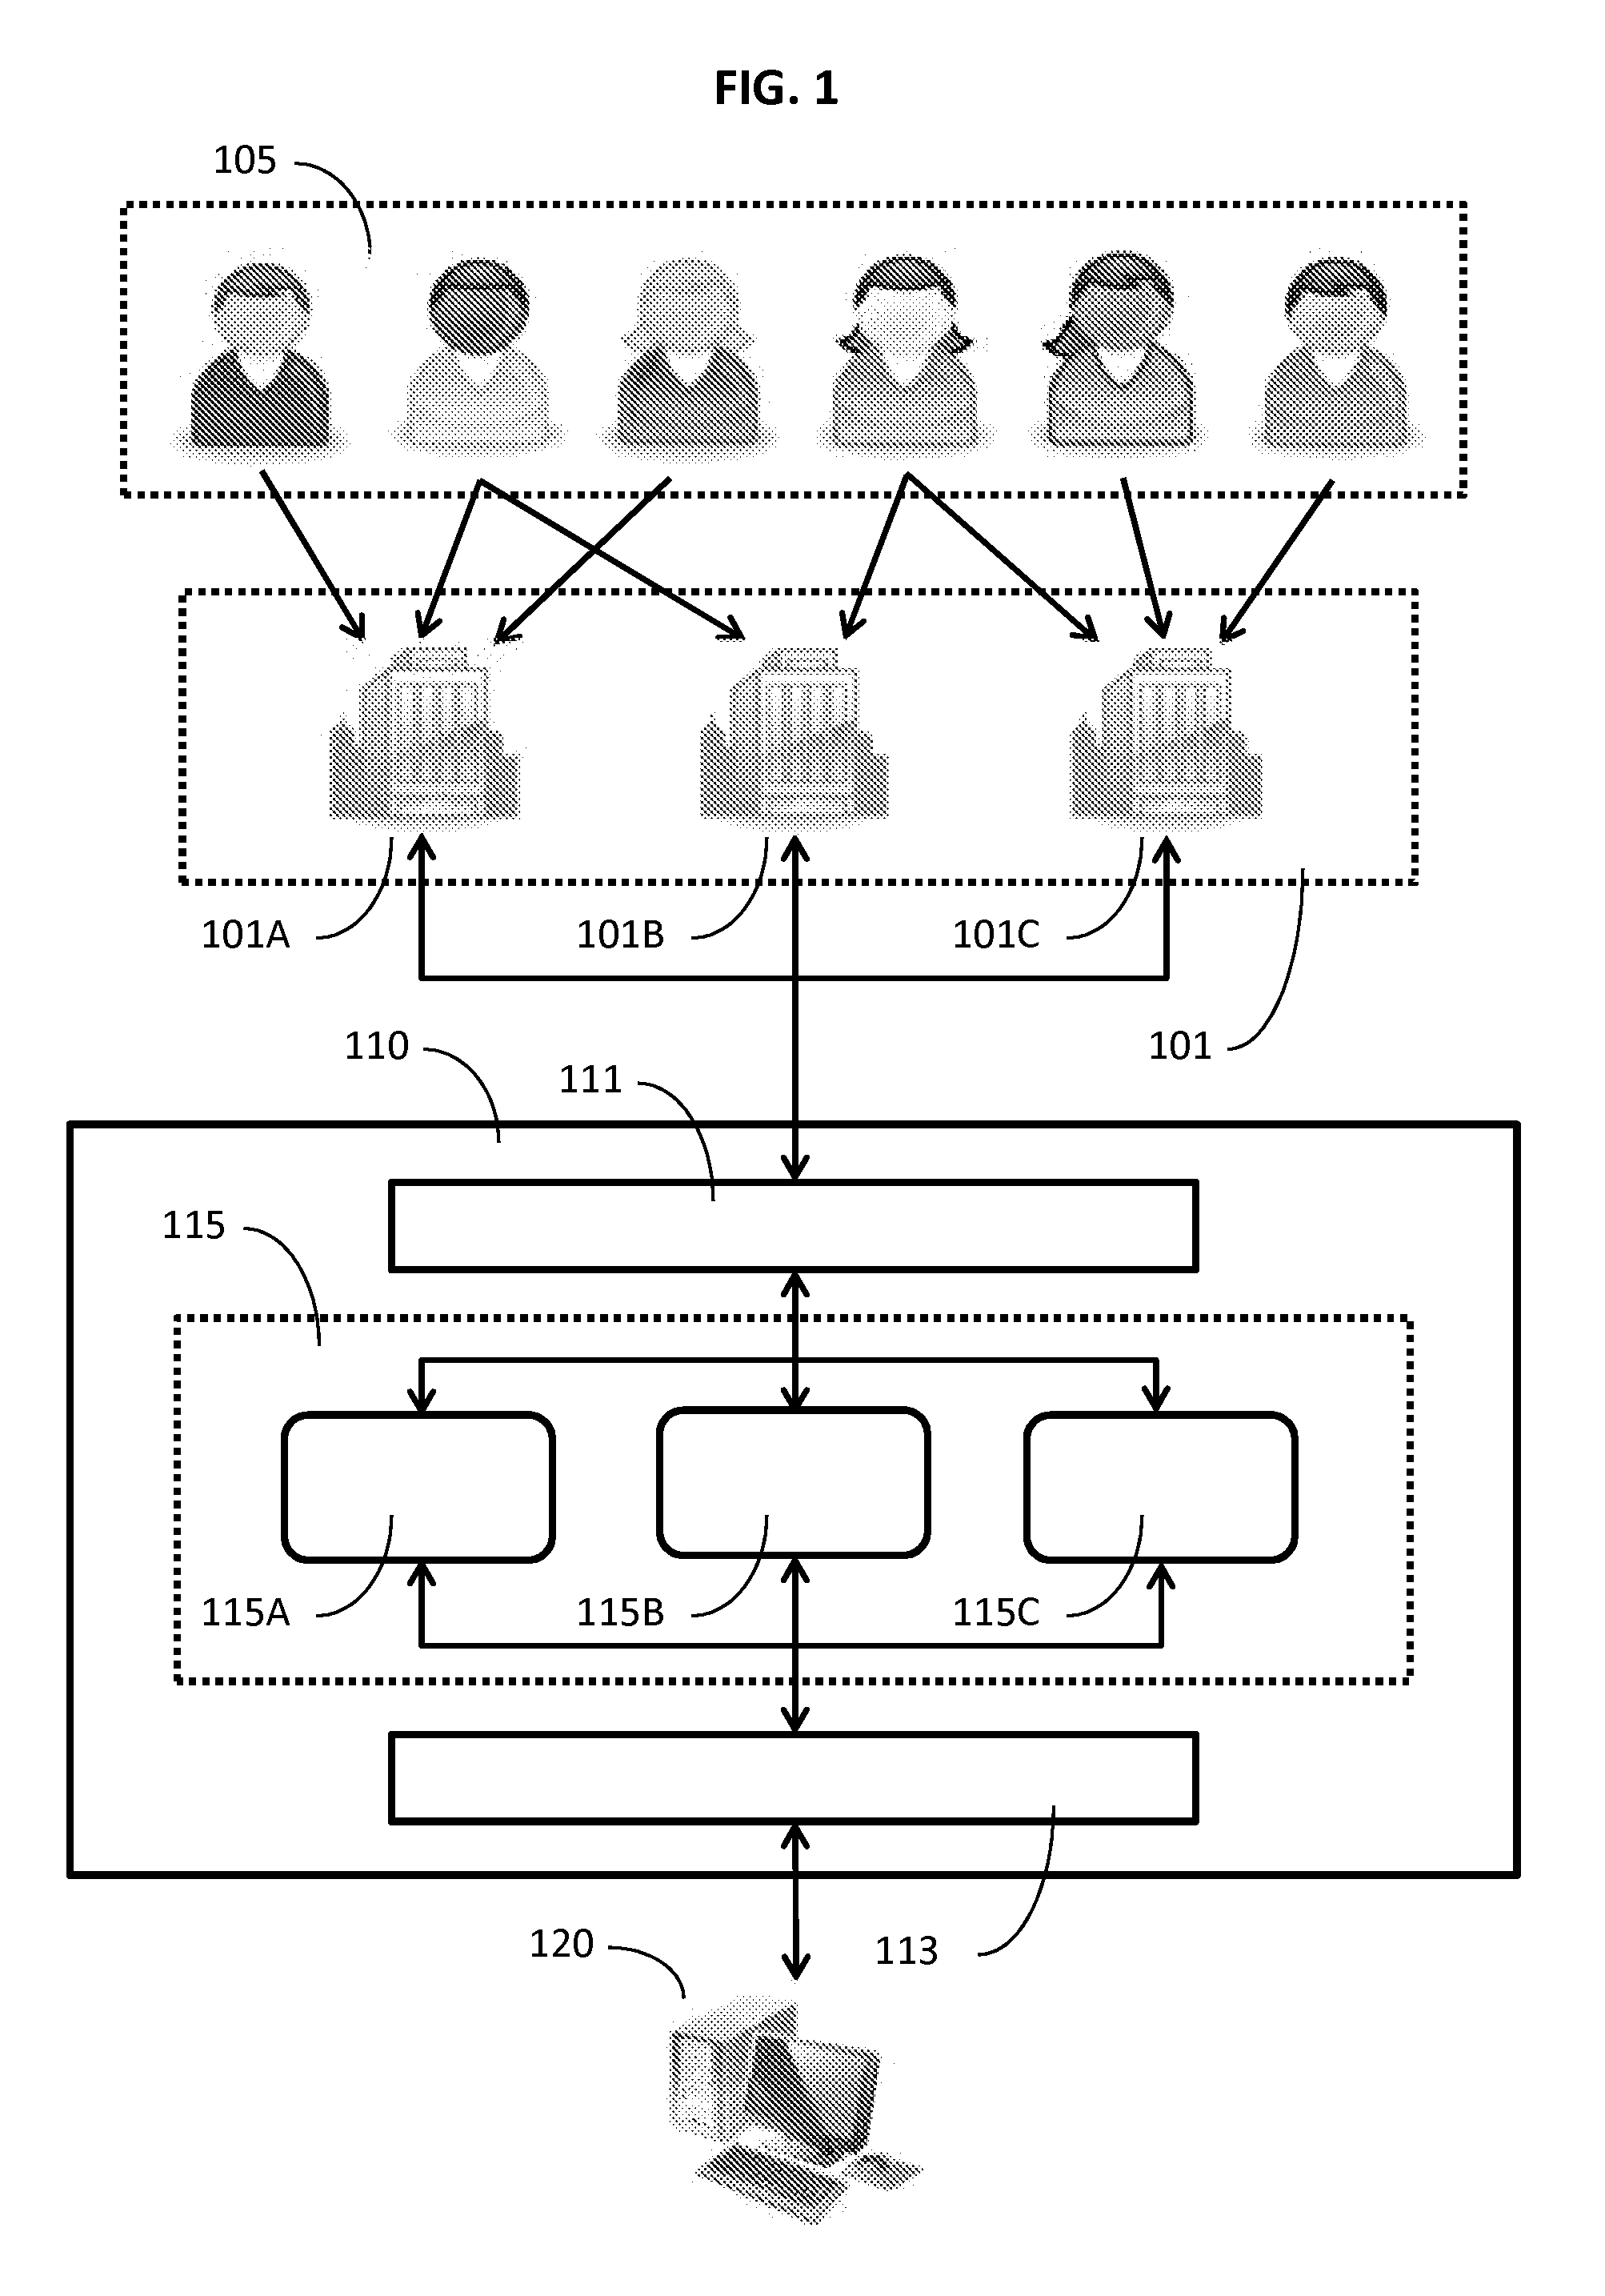 Systems and Methods for Receiving, Aggregating, and Editing Survey Answers from Multiple Sources